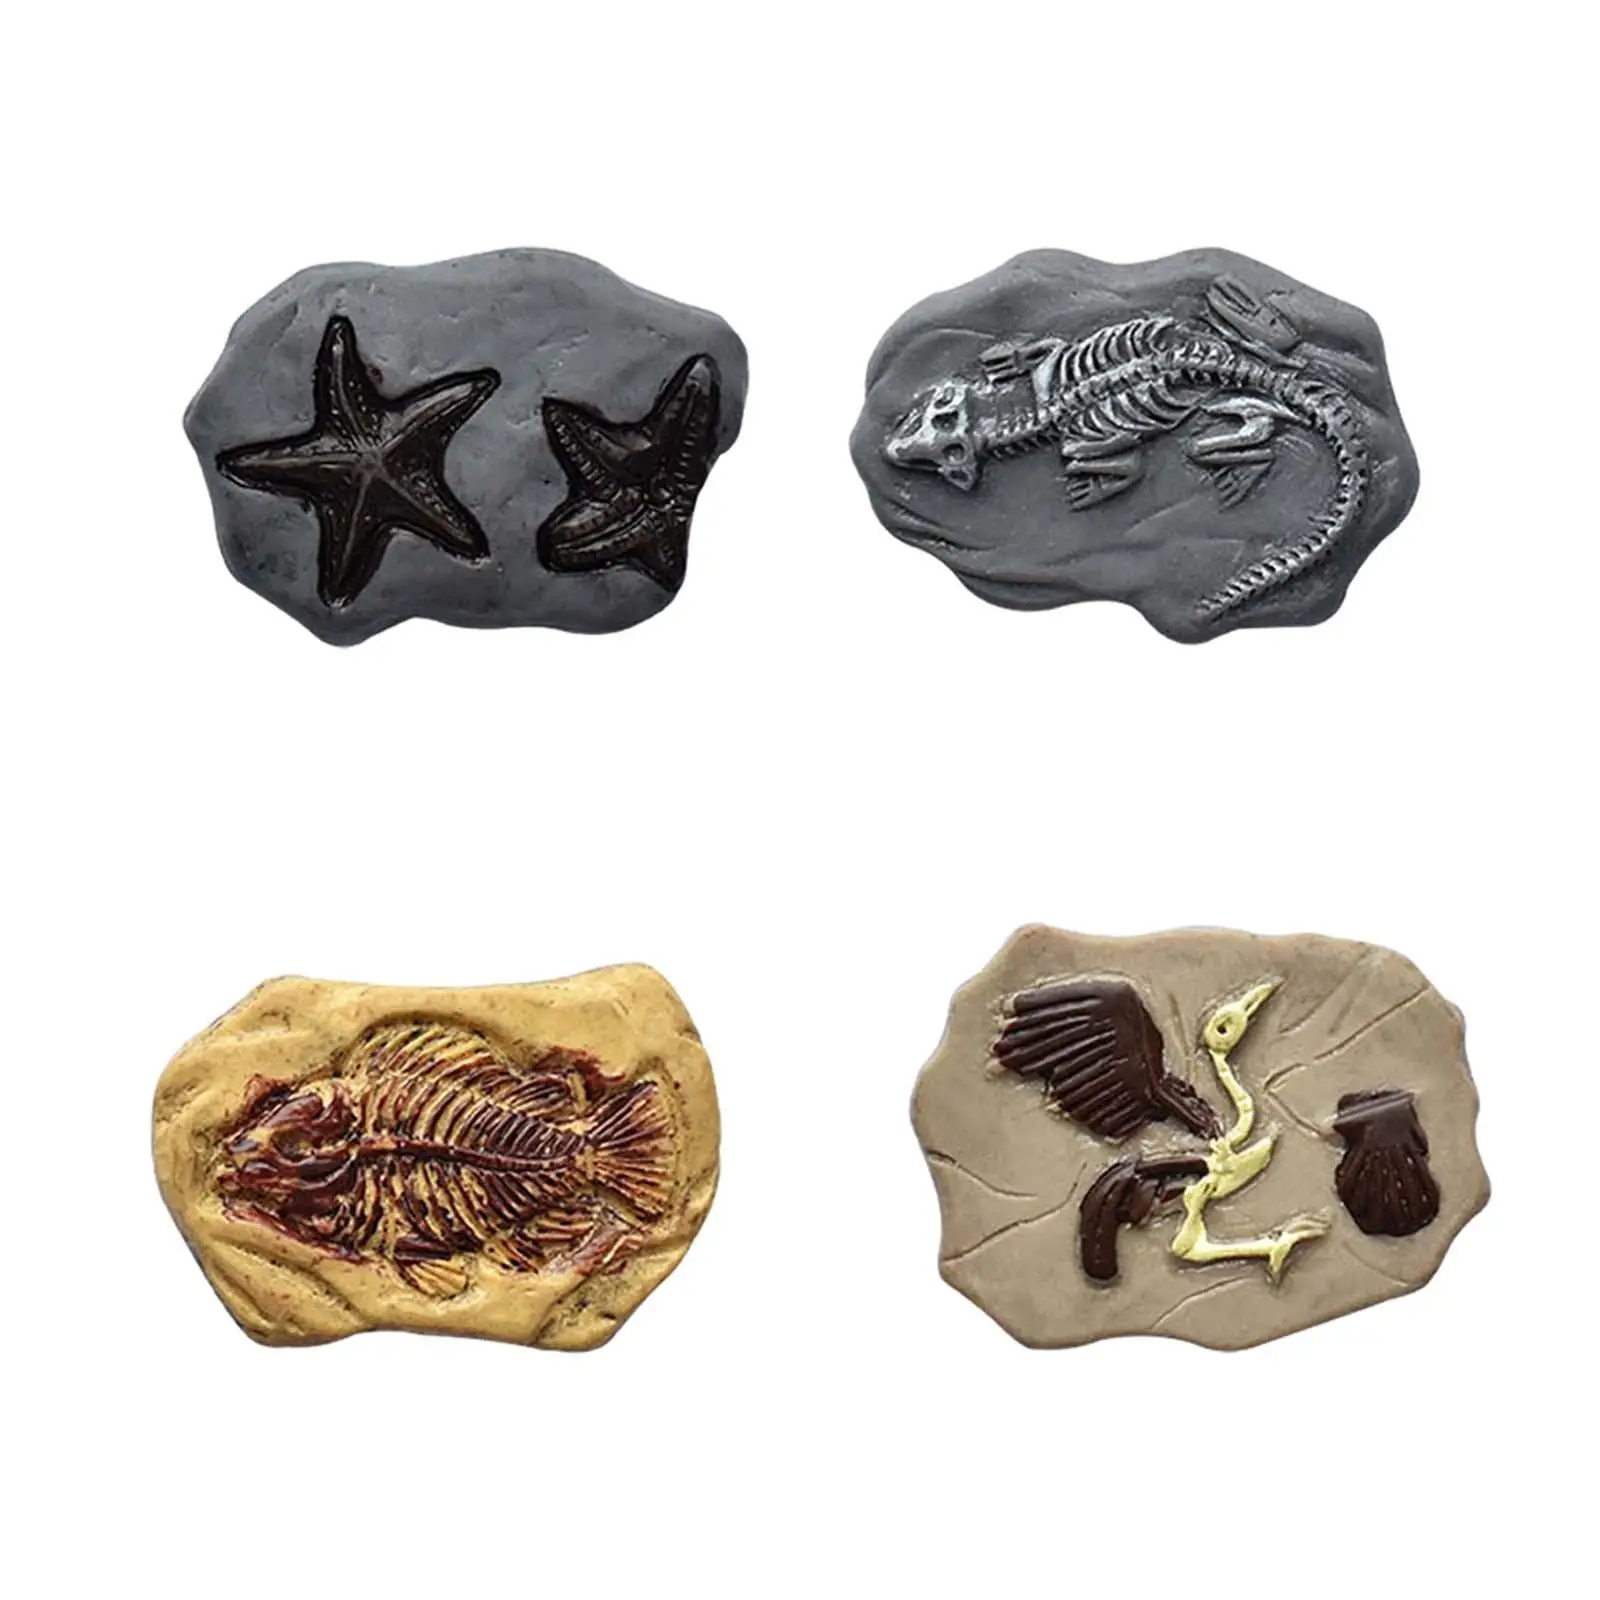 

Miniature Fossil Decoration Resin Educational Gift Science Play Realistic Carfts for Making Crafting DIY Projects Dollhouse Kids